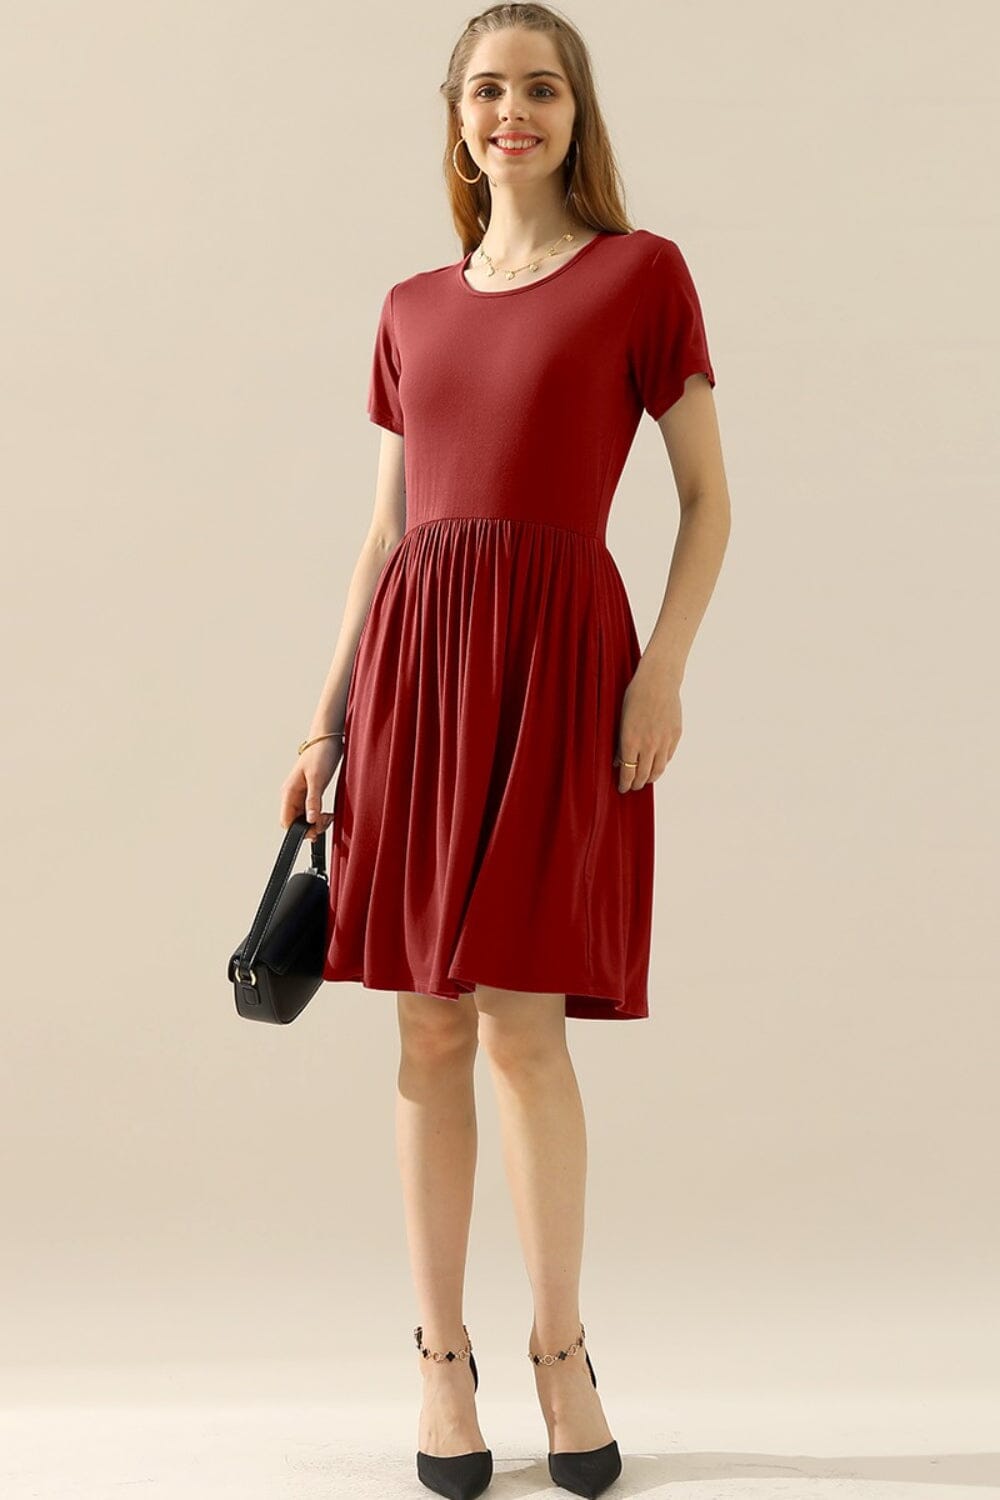 Ninexis Round Neck Ruched Dress with Pockets Dresses jehouze BURGUNDY S 